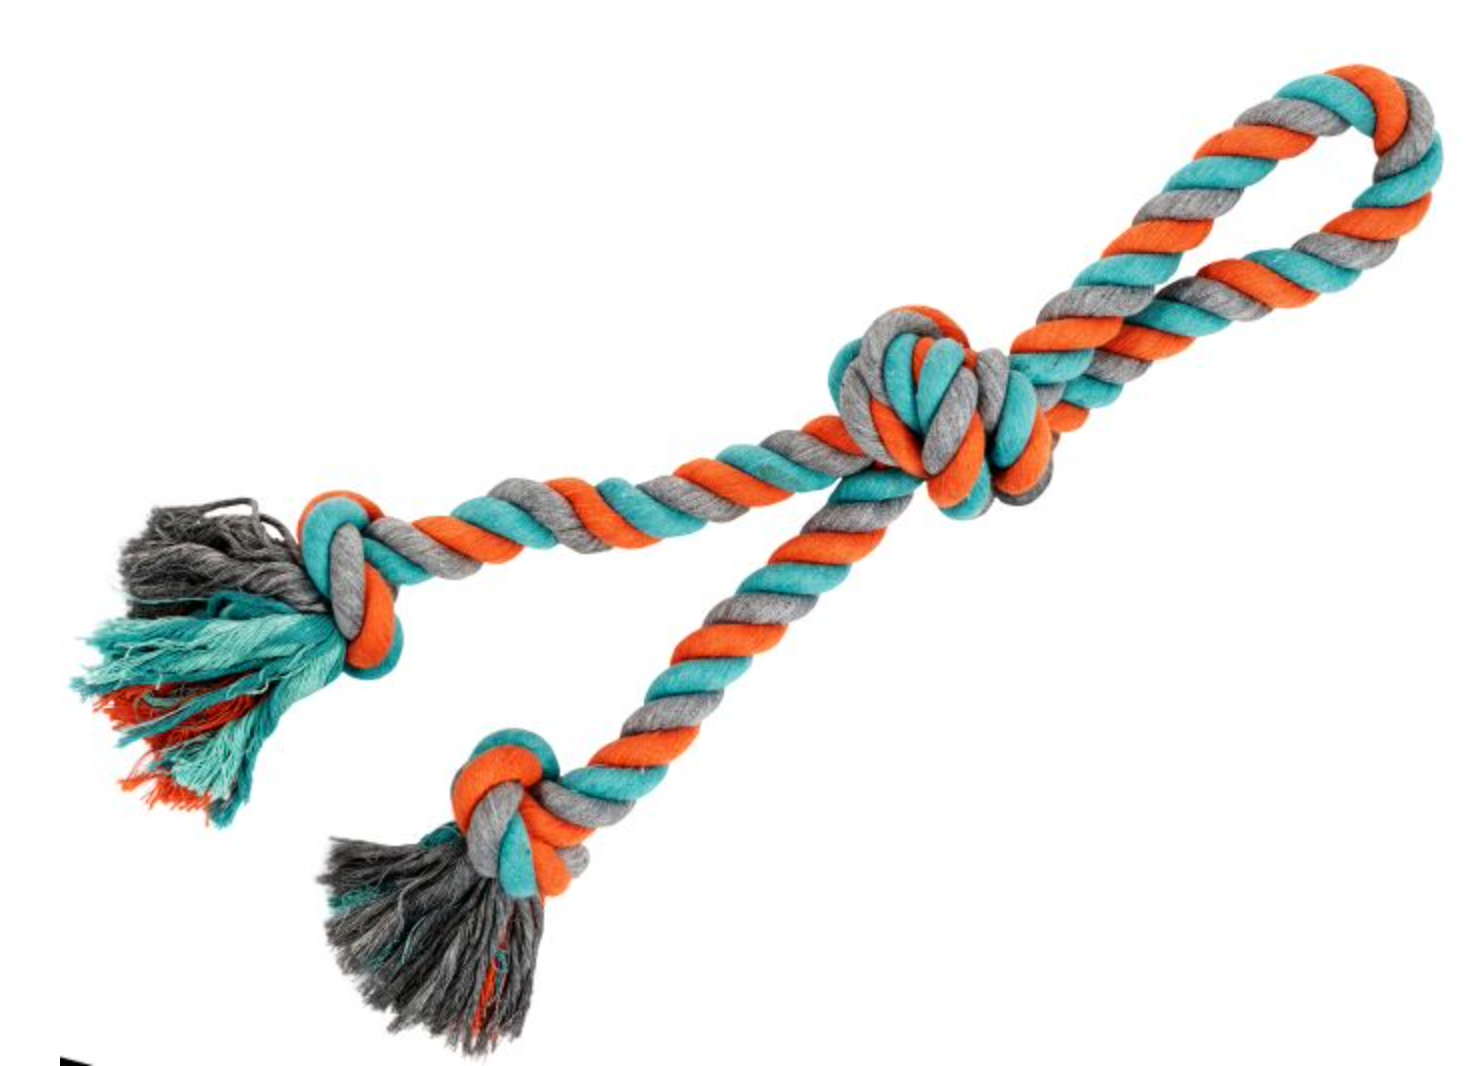 Bud'z Rope Double With 3 Knots - Orange And Blue Dog Toy (23.5)